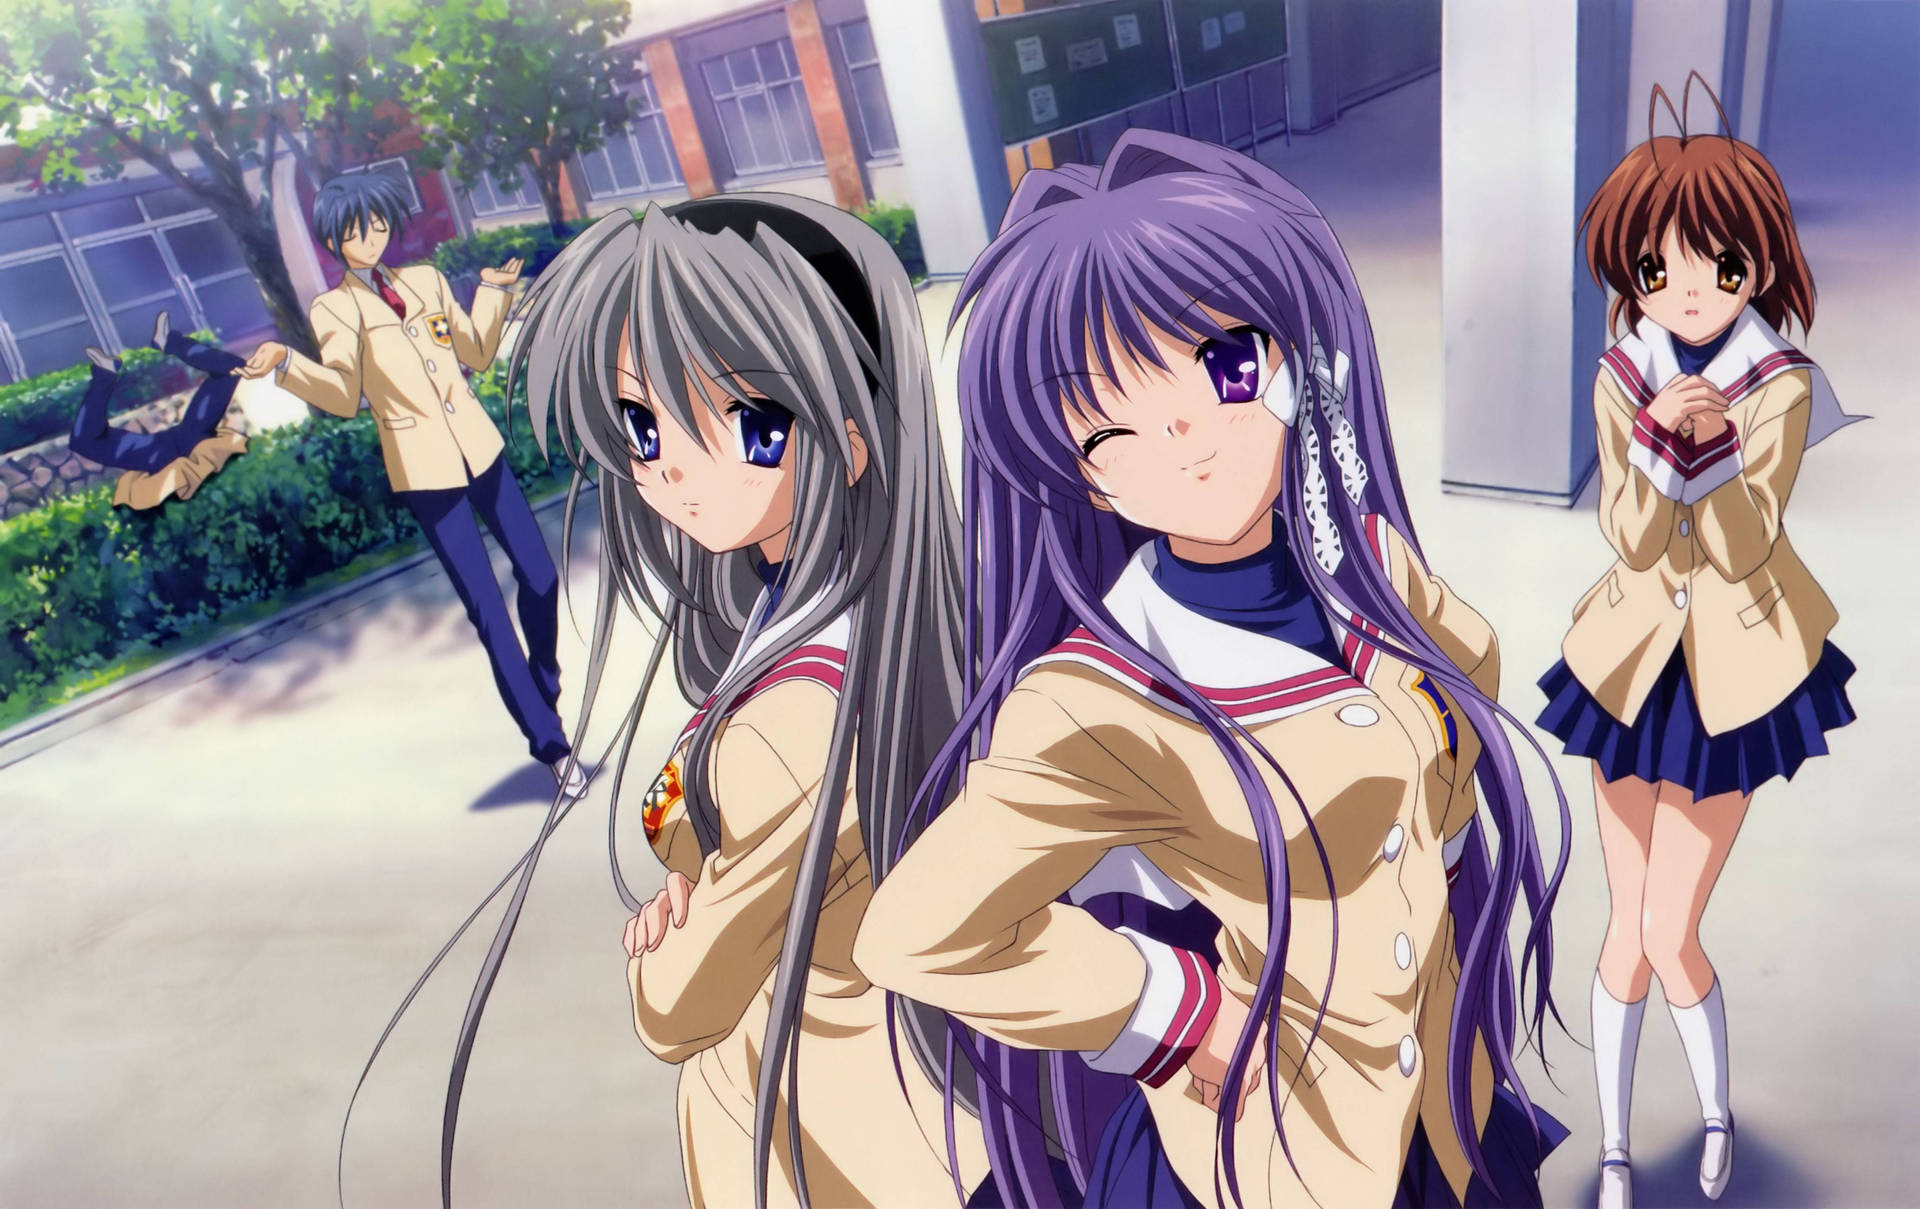 1300 Anime Clannad HD Wallpapers and Backgrounds